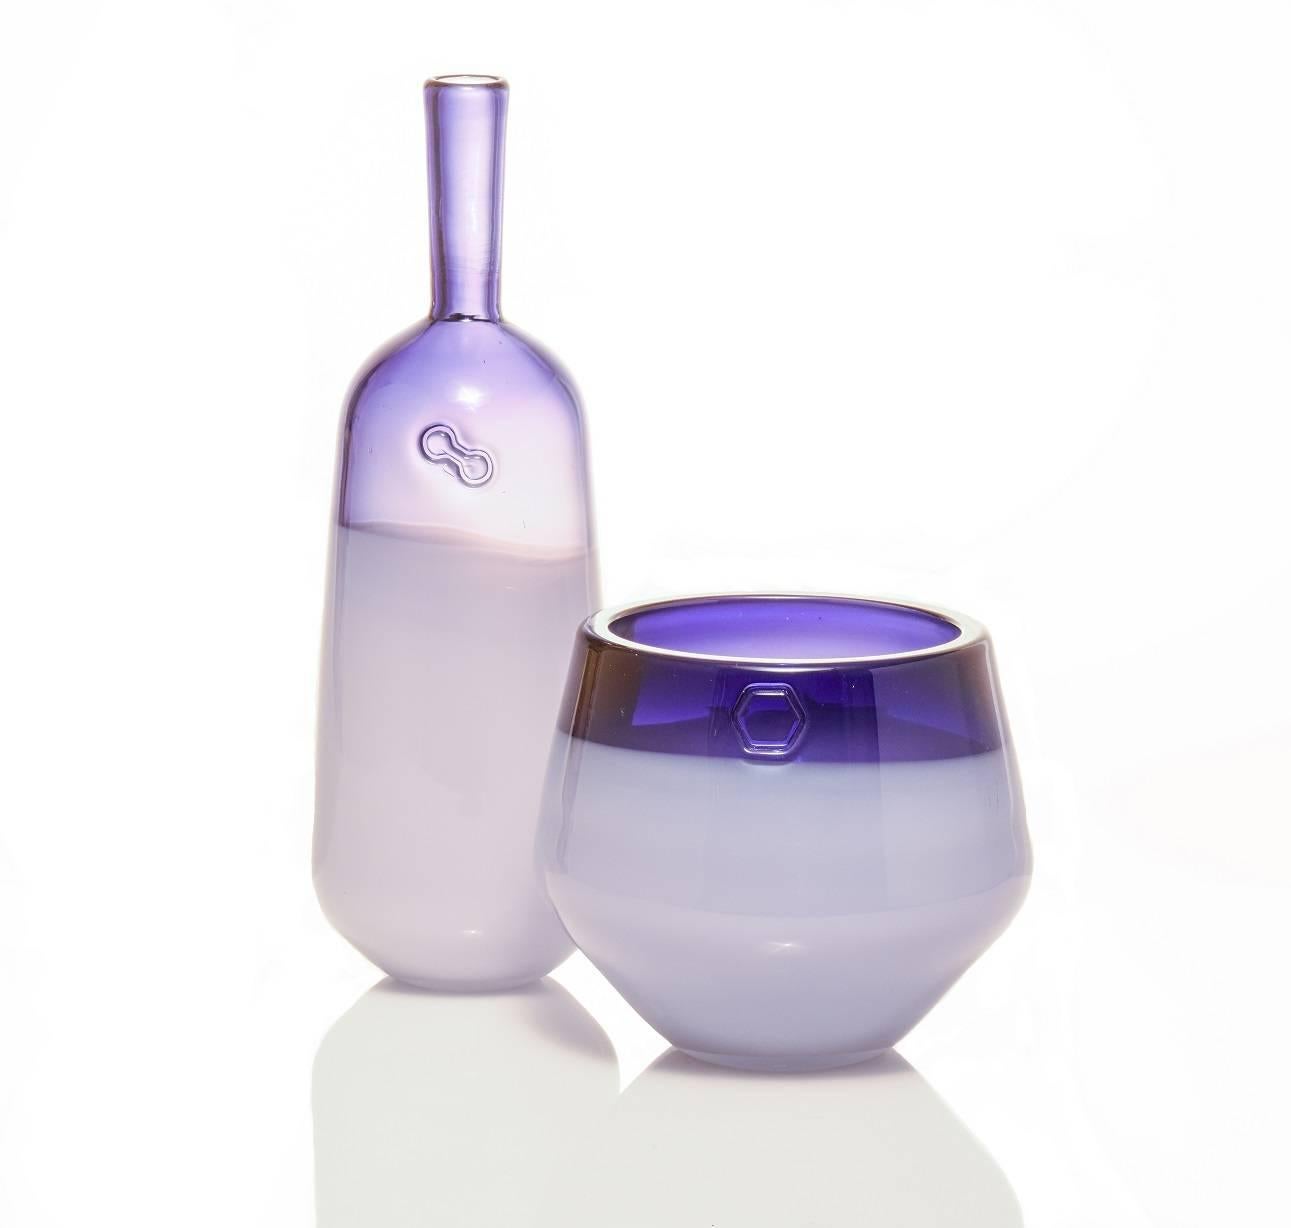 The Branded series is a set of modern design objects which each feature a hand impressed brand that highlights these wholly handmade vessels. For color, each piece features a transparent tone on the entire piece with an opal white overlay on the